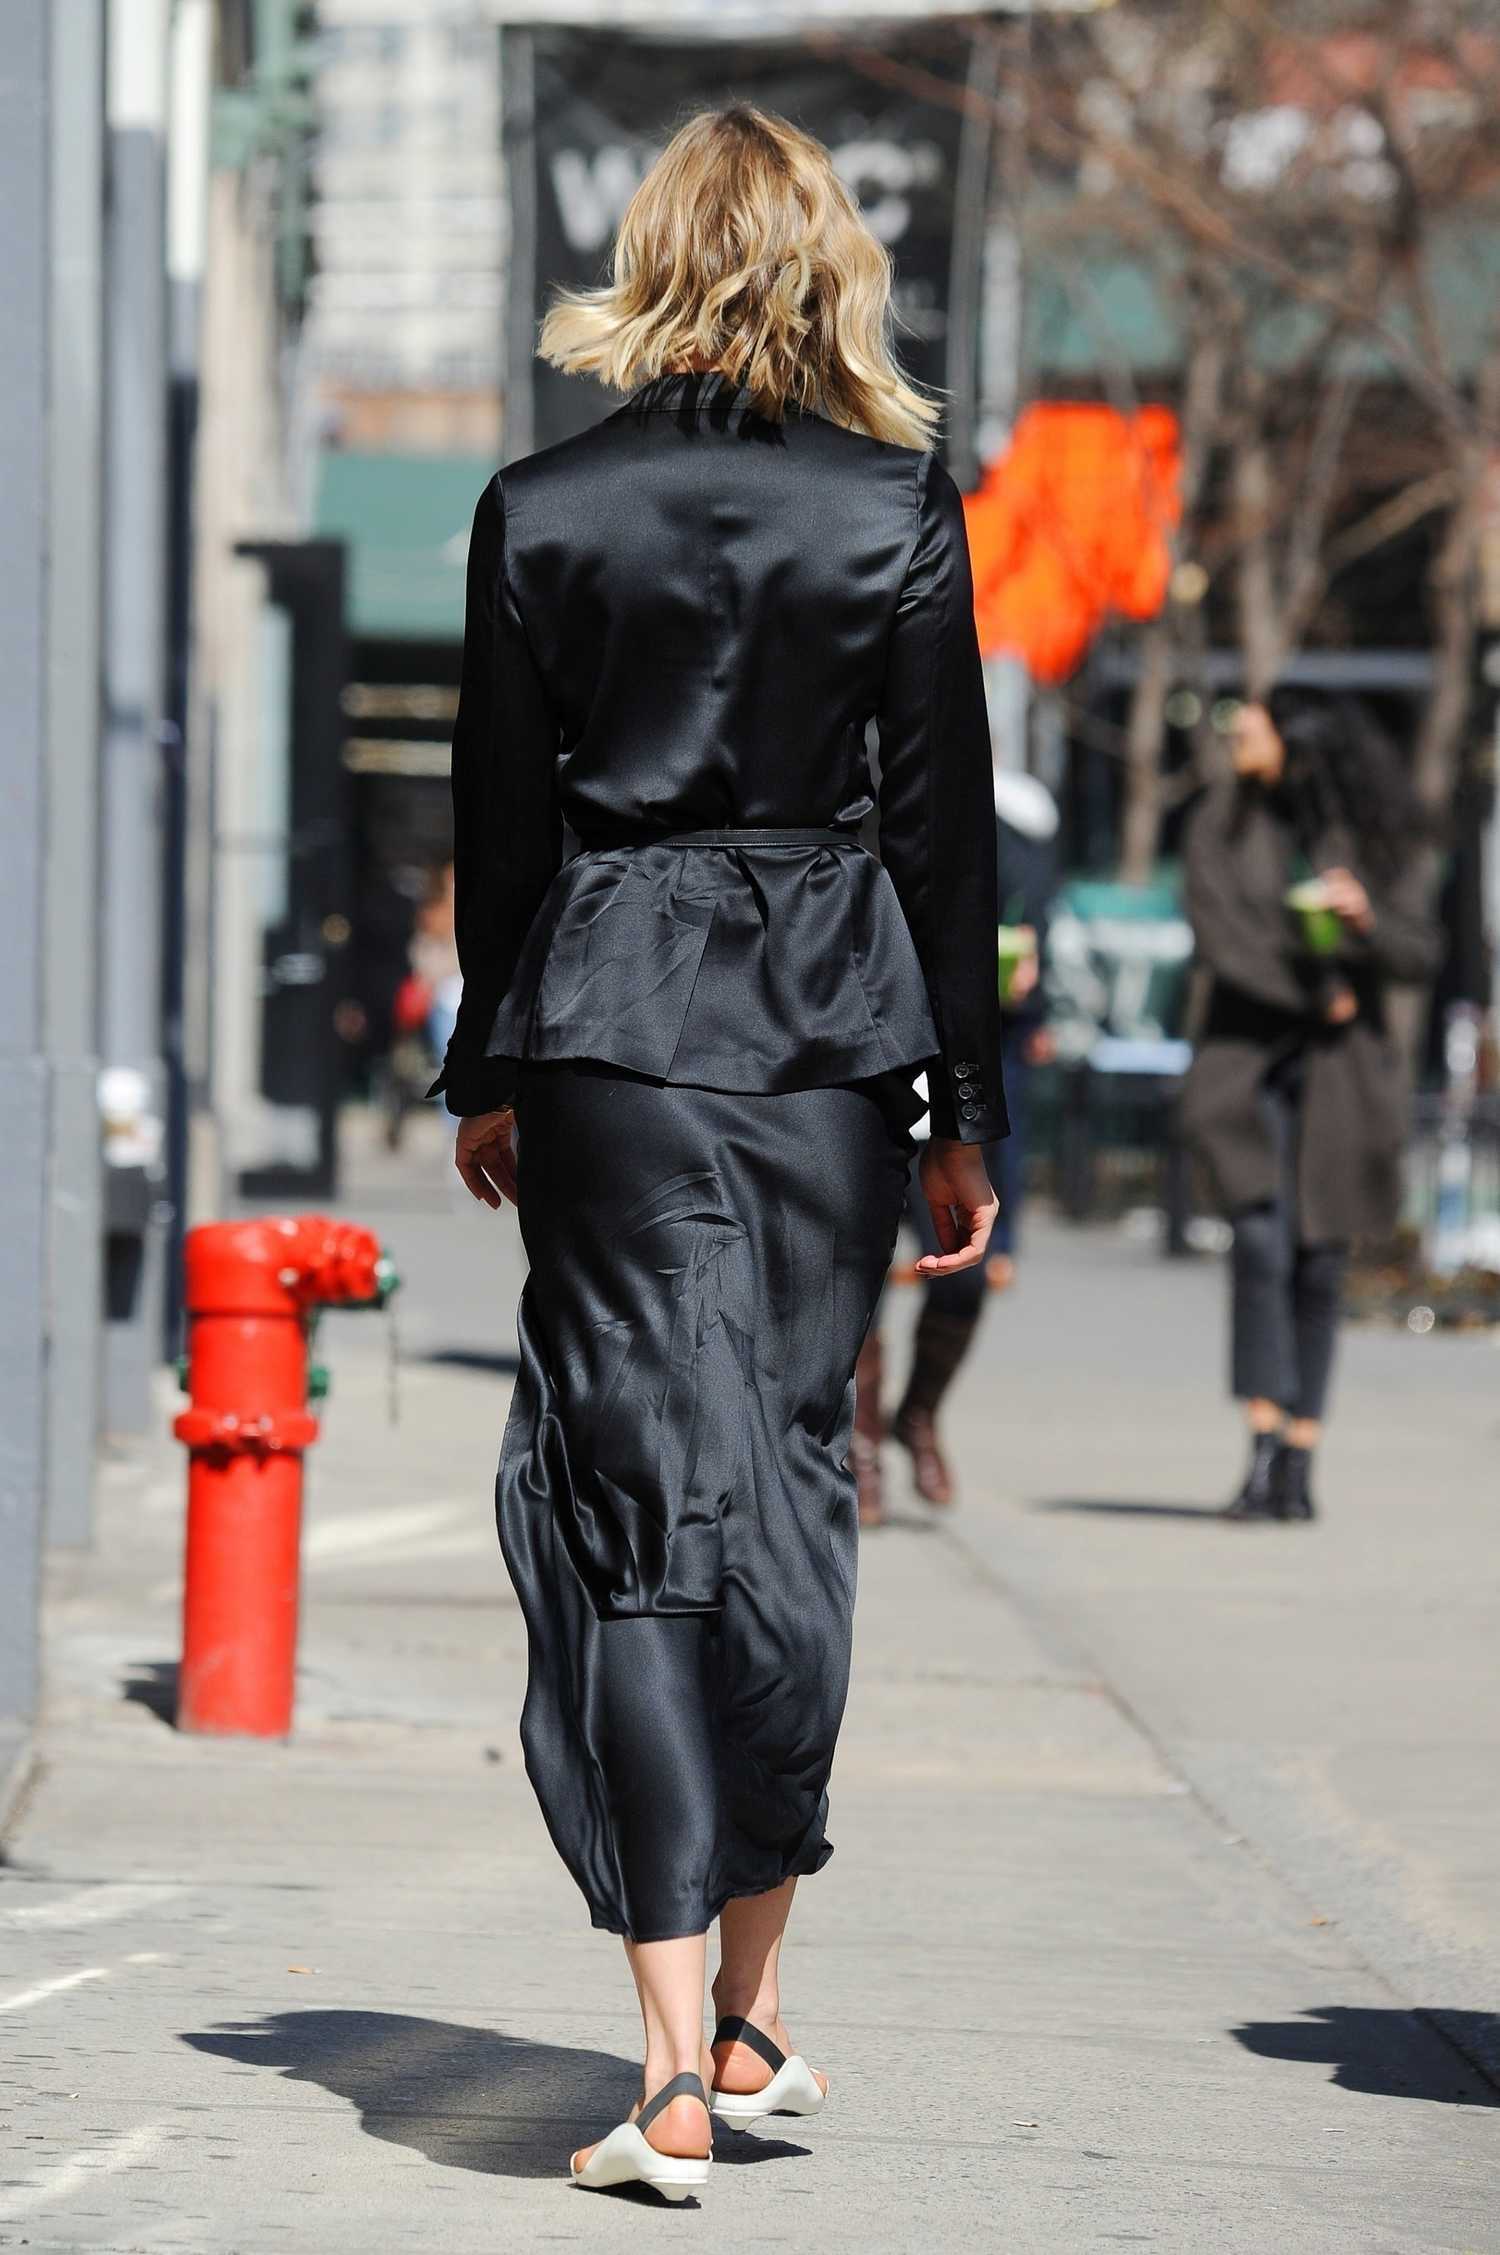 Karlie Kloss in a Black Suit Was Seen Out in Soho, NYC – Celeb Donut